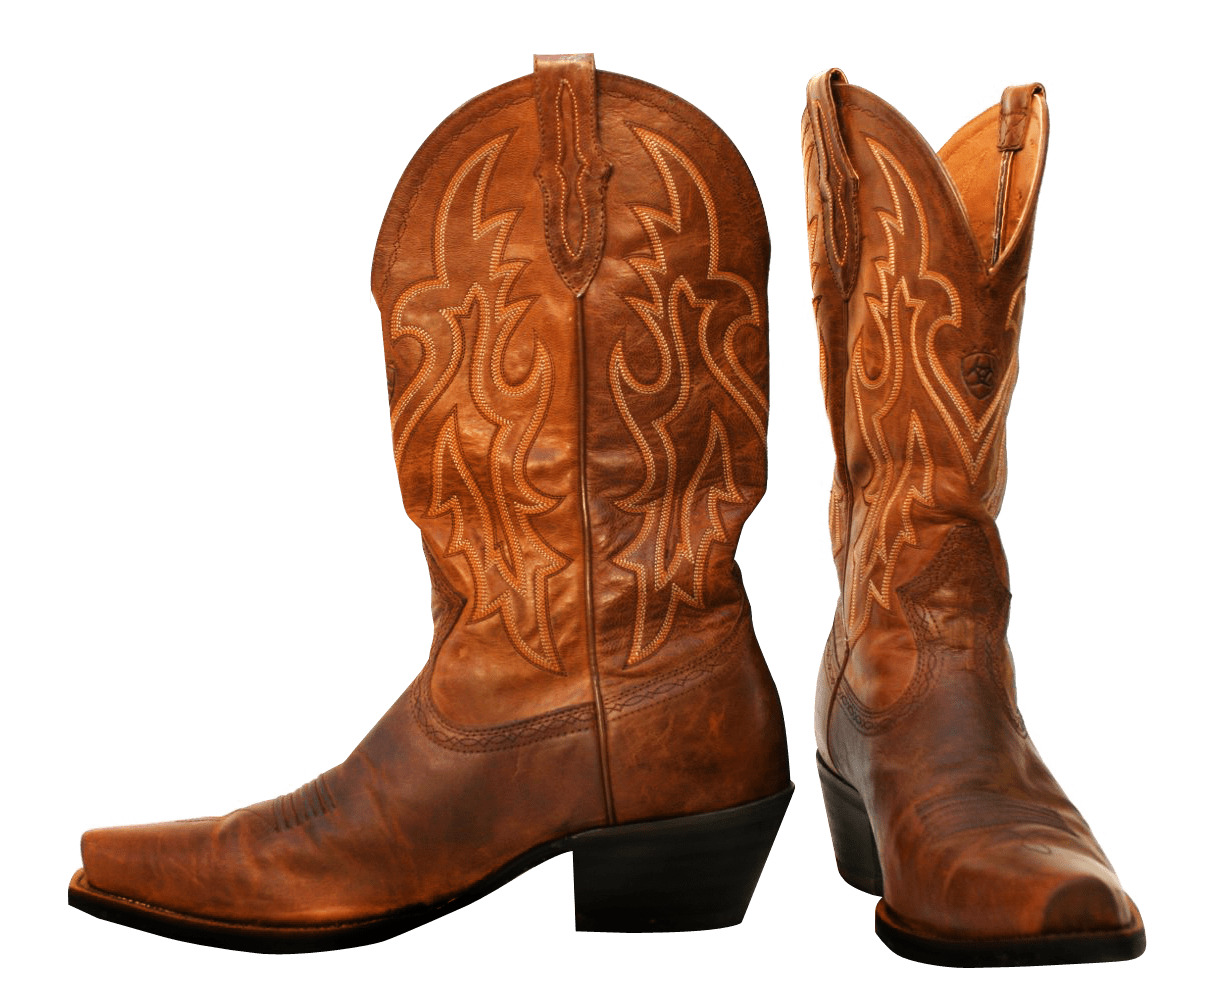 Pair Of Cowboy Boots icons